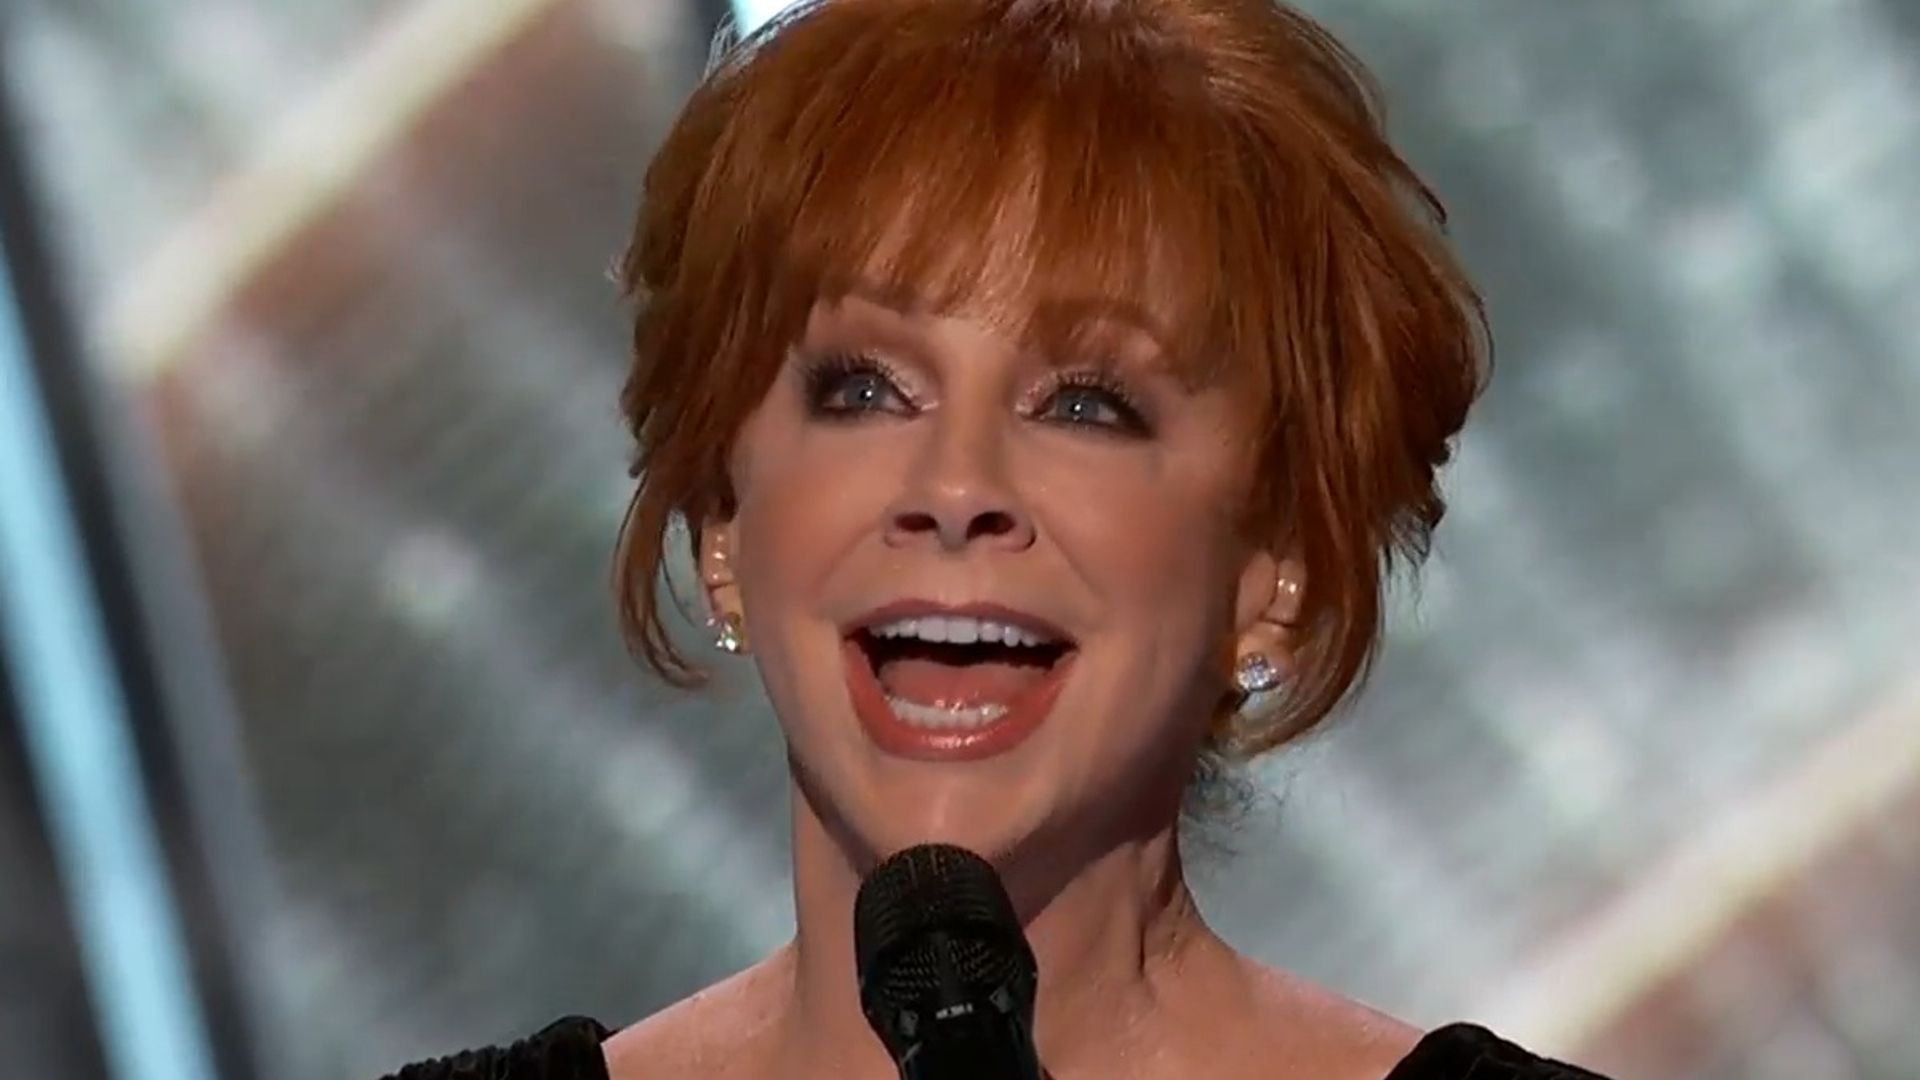 Reba McEntire leaves audience in tears after 'emotional' Oscars performance